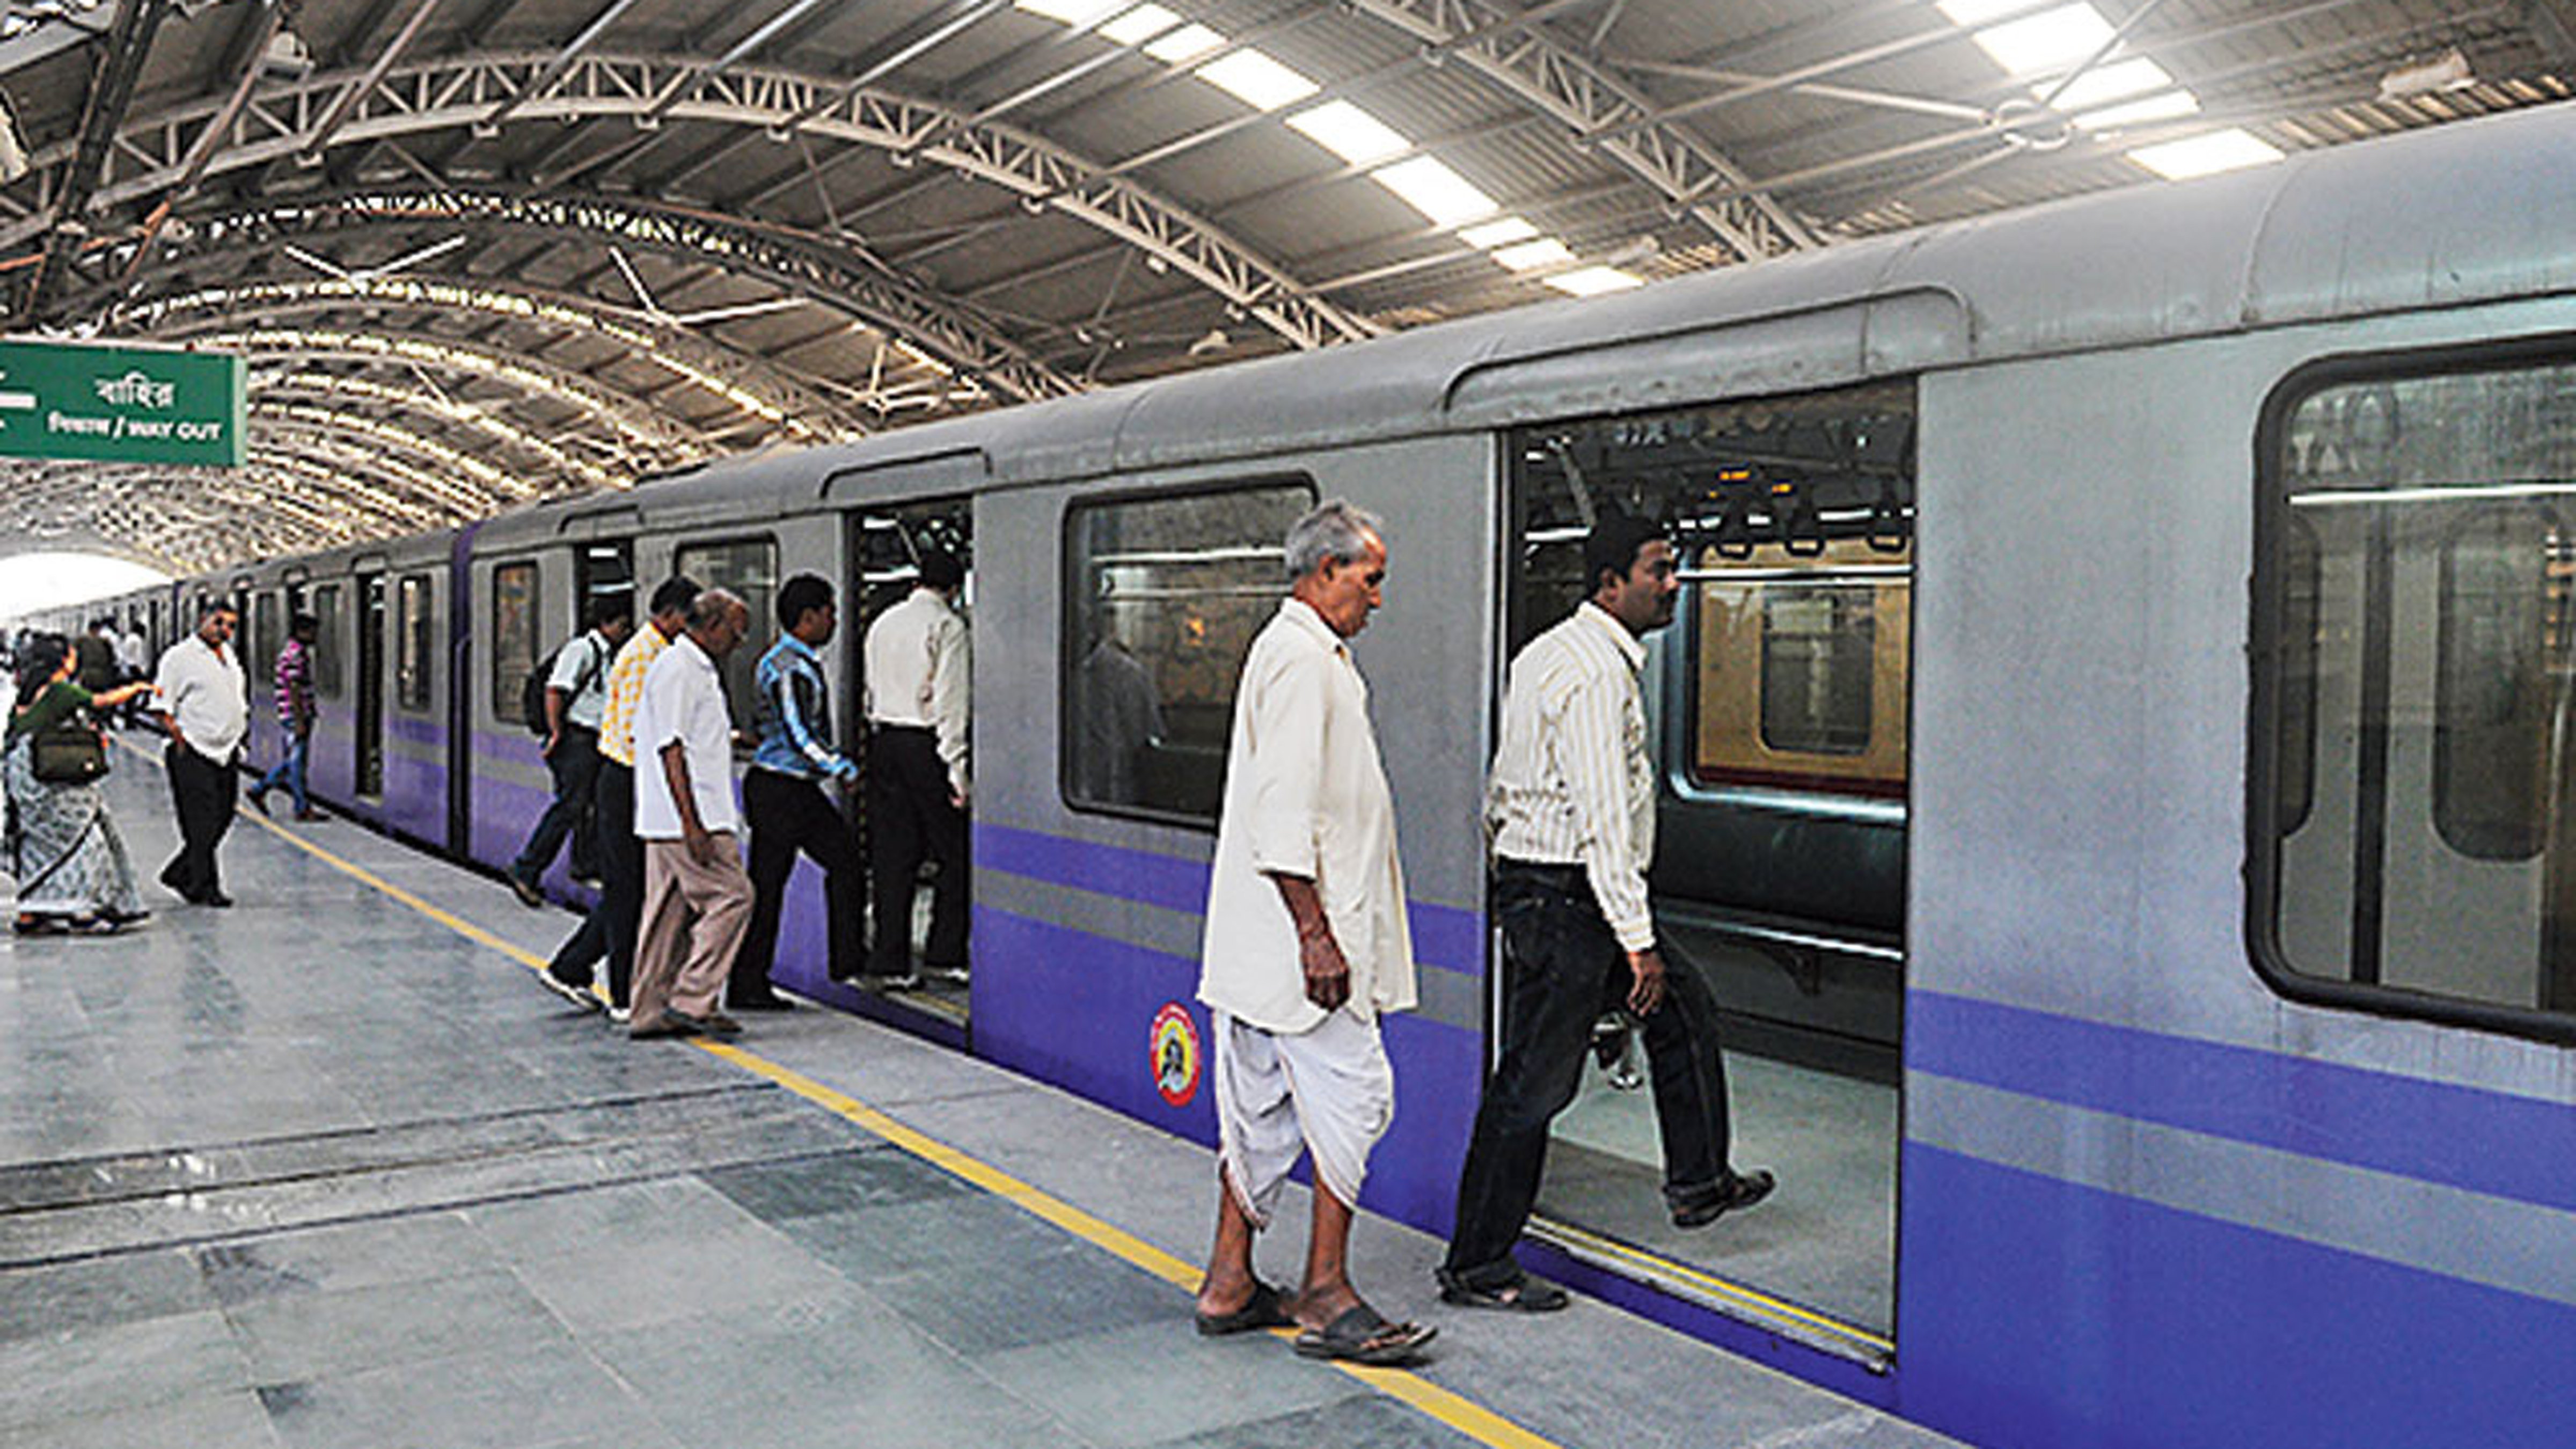 The Railway Board has approved underground construction along a technically challenging 3.5km stretch and sanctioned an additional Rs 1,622 crore for the project. The photograph above is of a Calcutta Metro train but not on the Airport-Barasat Metro route that is yet to be laid.